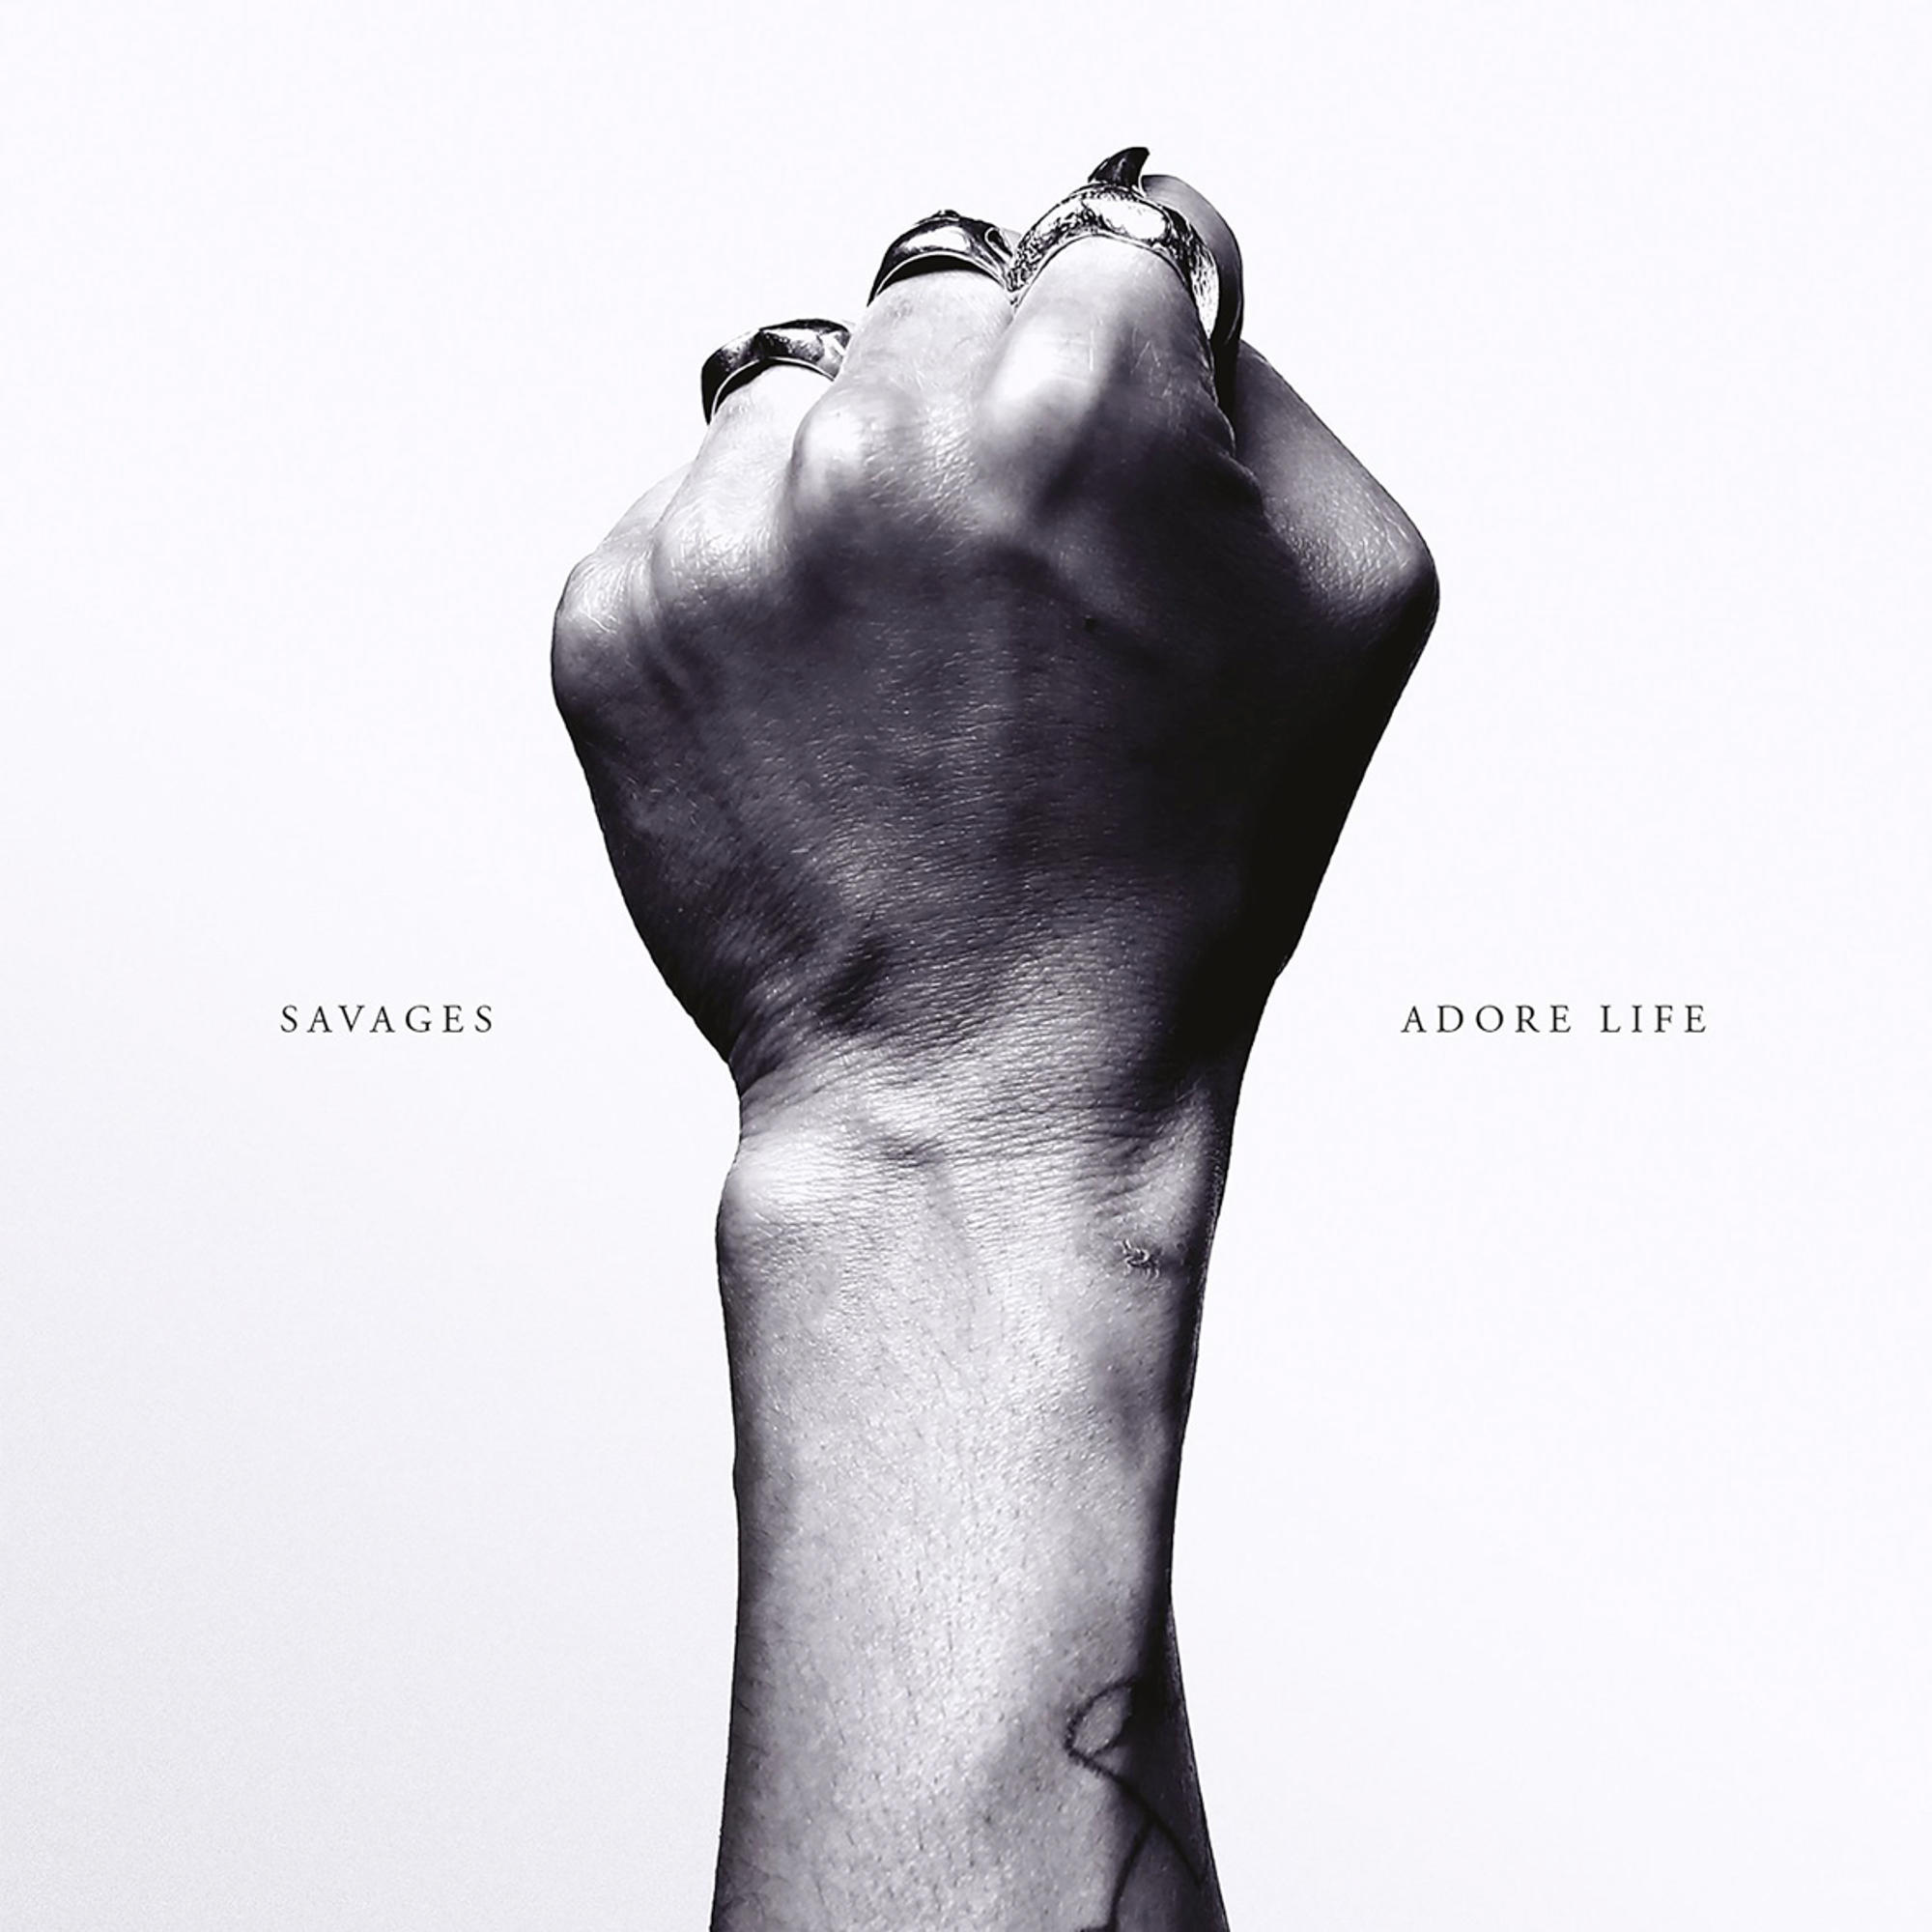 Download) Adore (LP + Savages - Life The -